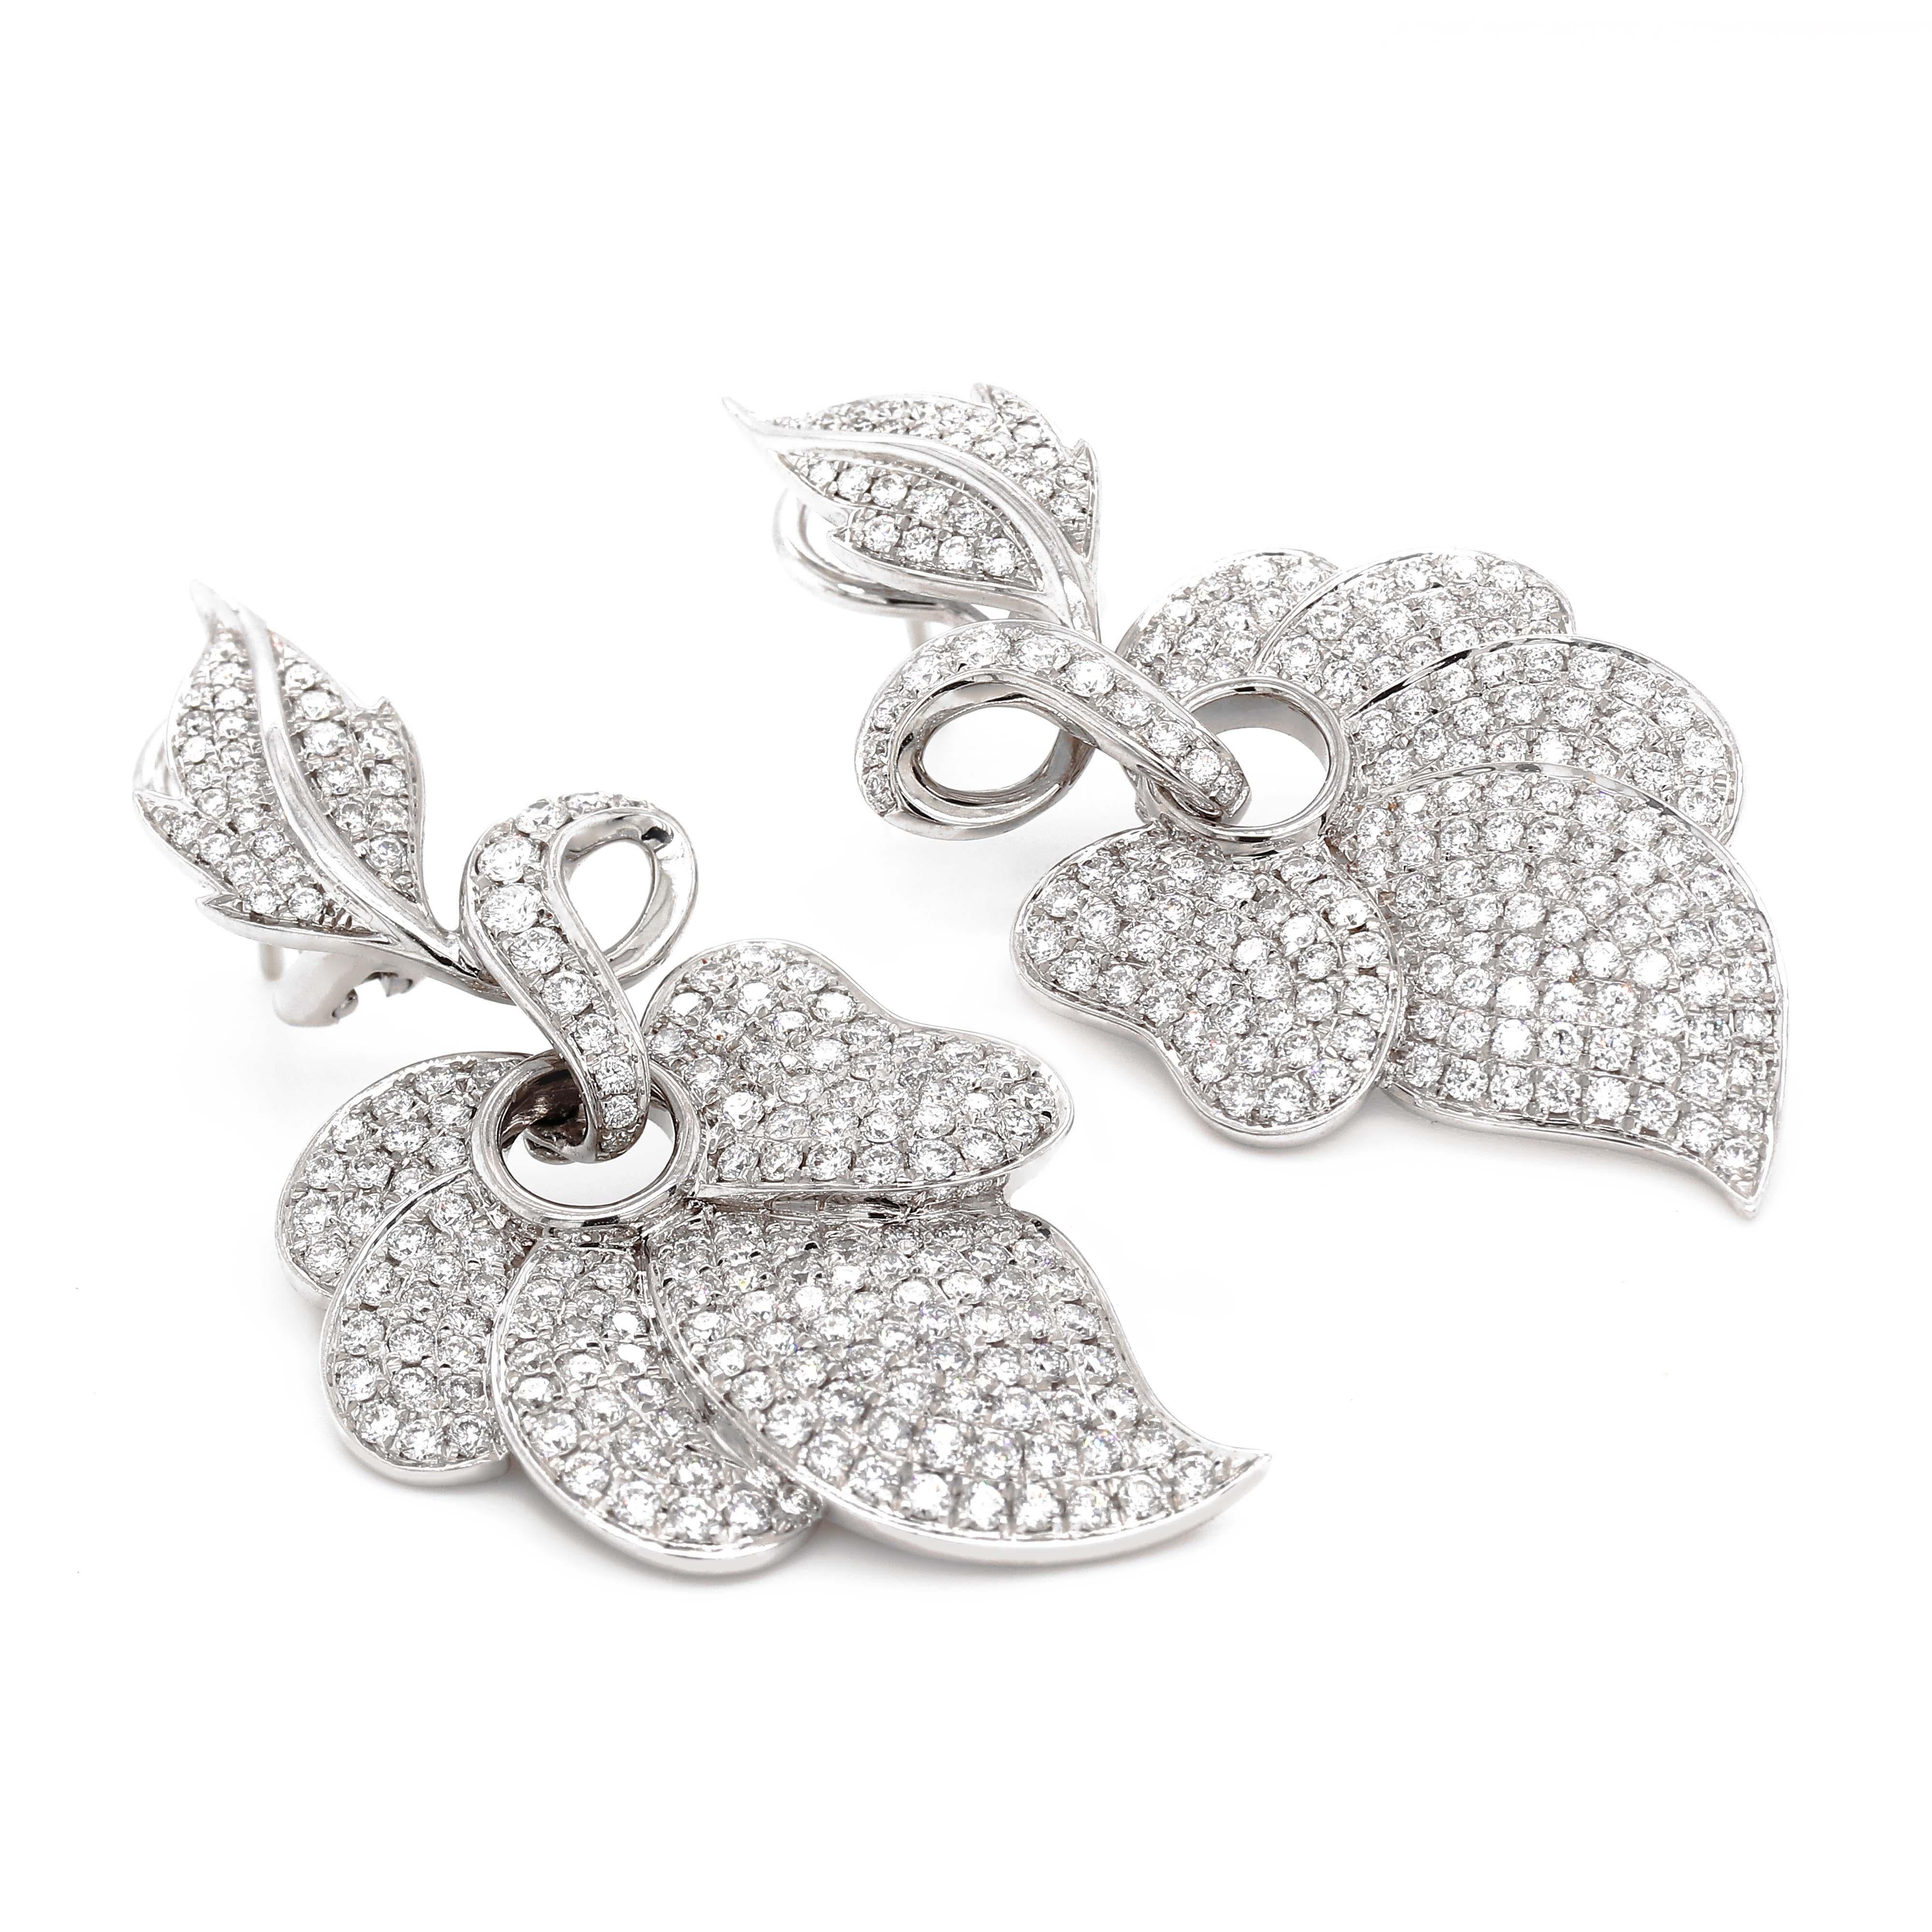 Earrings containing 376 round brilliant cut diamonds of about 2.95 carats with a clarity of VS and color G. All diamonds are set in 18k white gold earrings. The total weight of the earrings is approximately 16.00 grams.